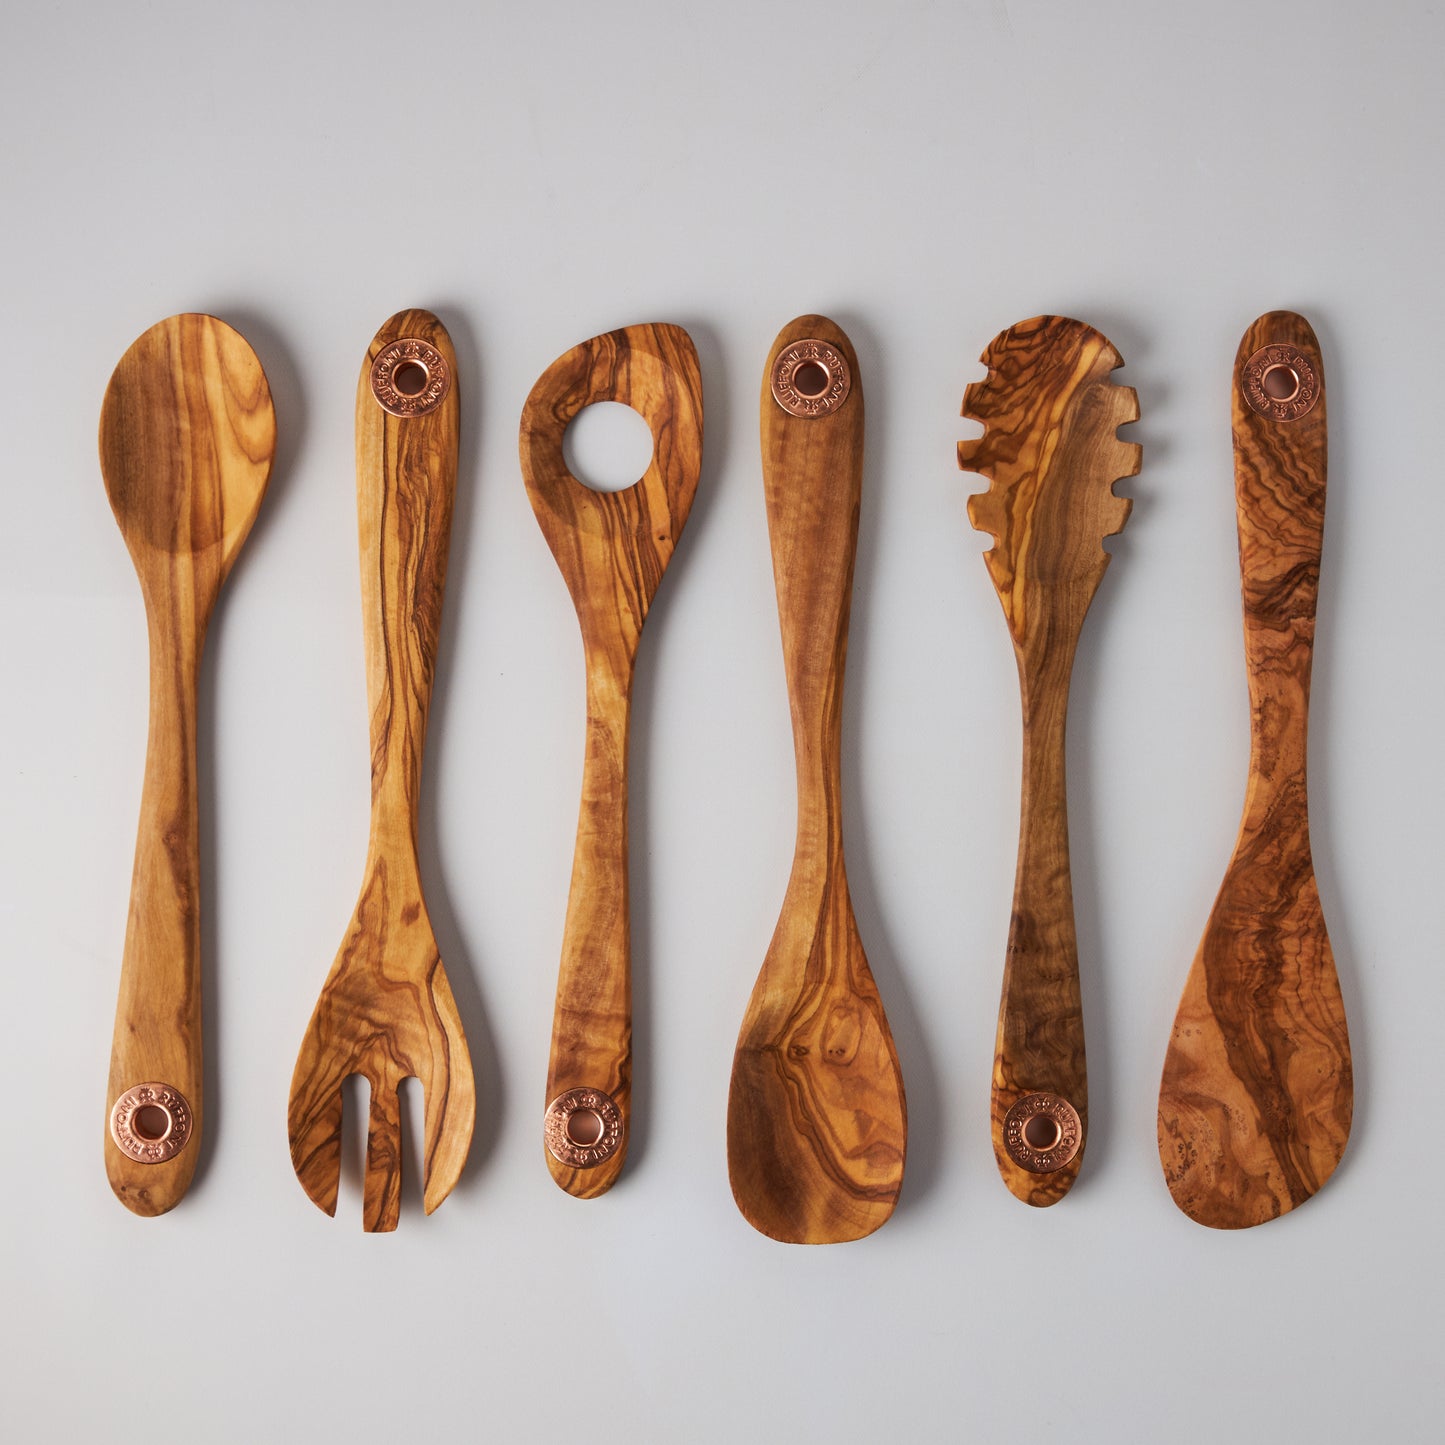 Copper Utensil Holder with 6 pcs Olivewood Tool Set